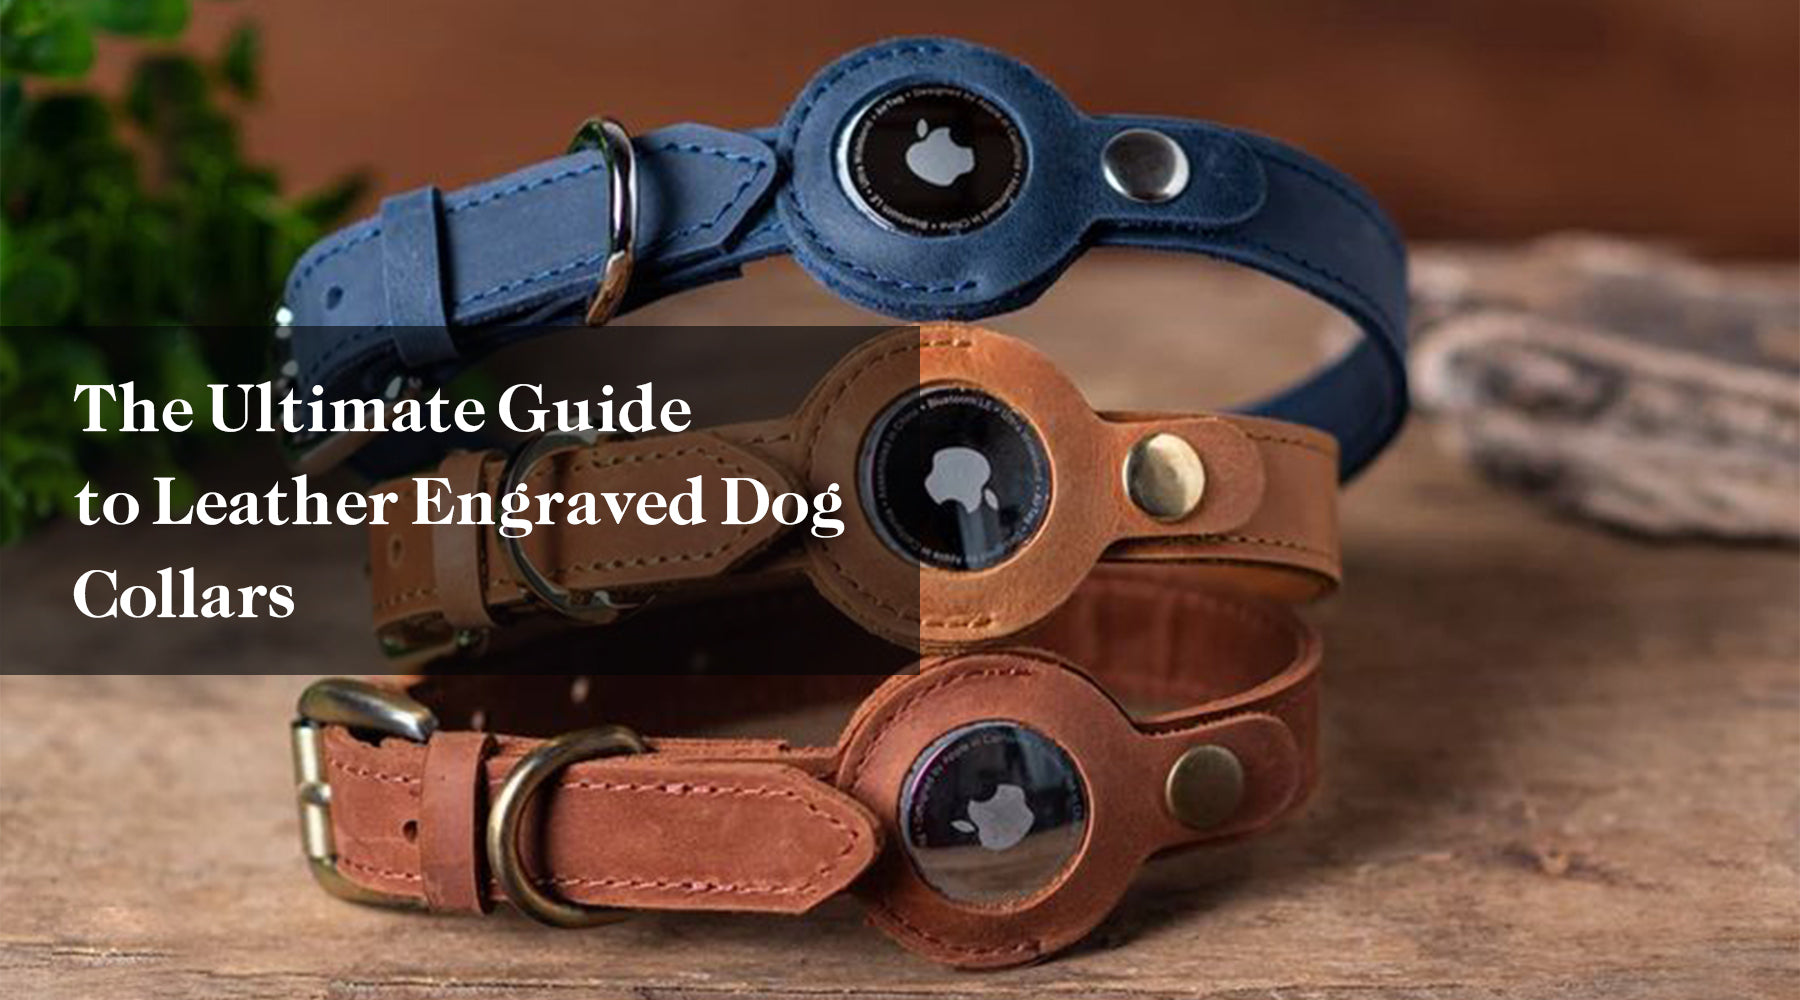 The Ultimate Guide to Leather Engraved Dog Collars